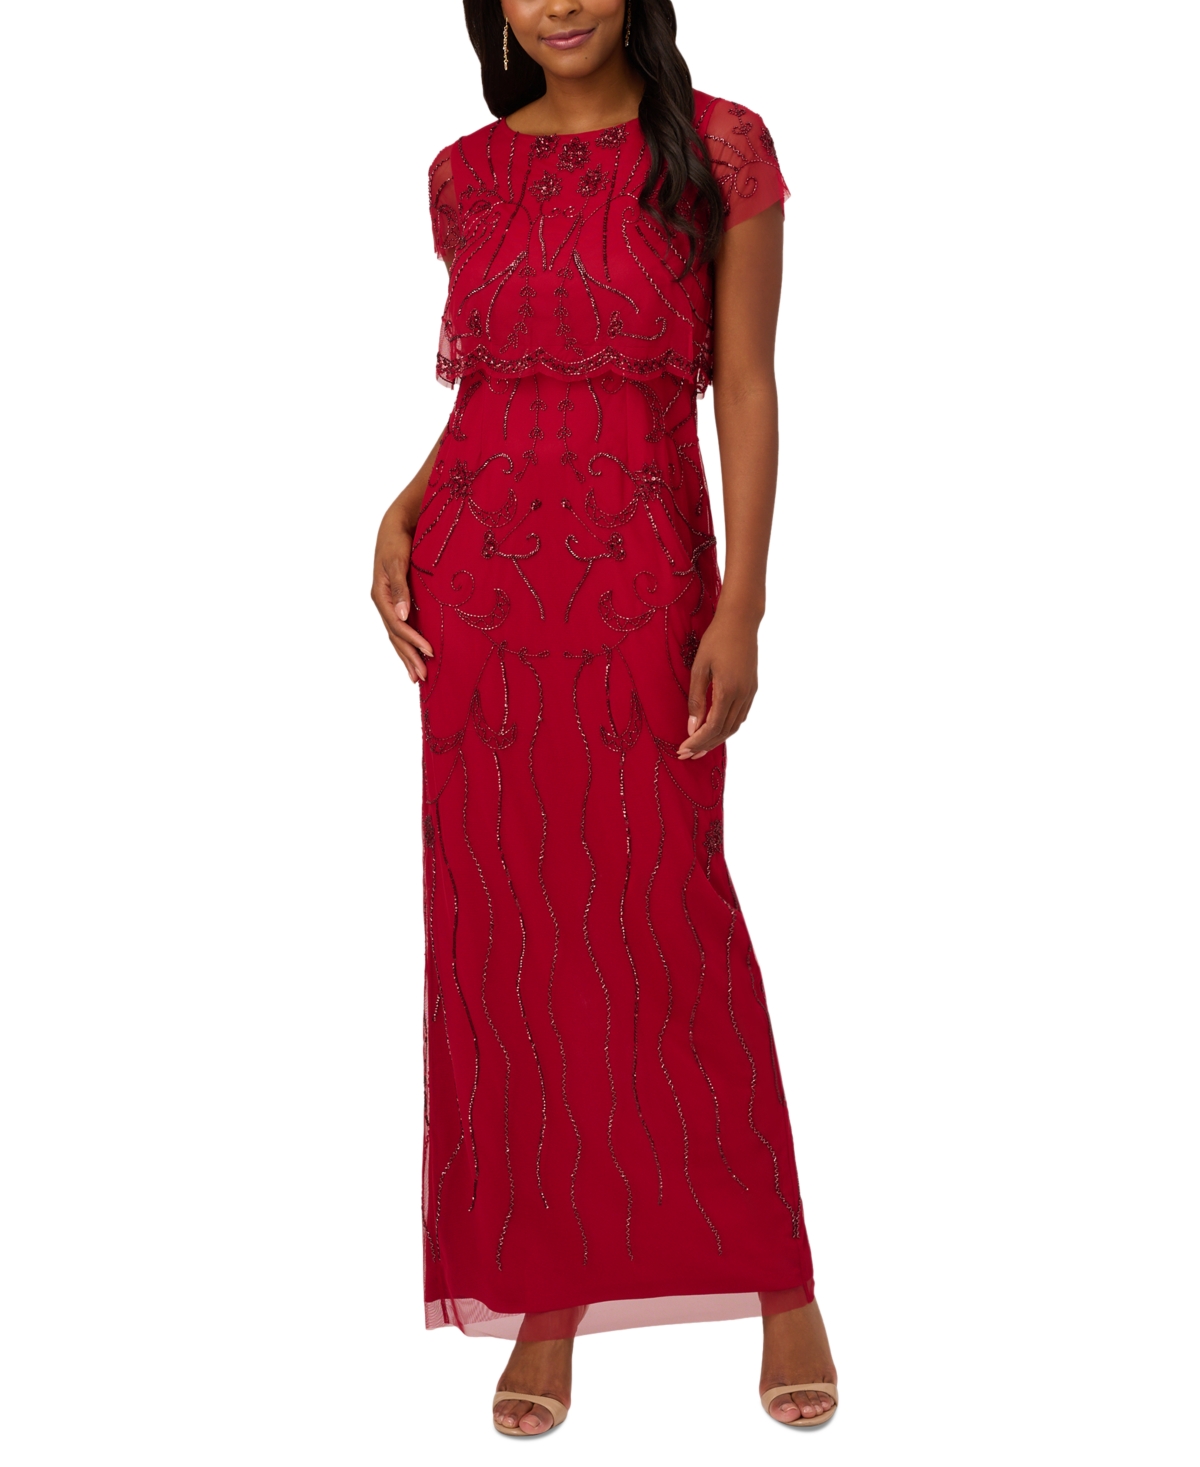 1920s Style Dresses, 1920s Dress Fashions You Will Love Adrianna Papell Petite Beaded Scalloped-Popover Gown - Cranberry $229.00 AT vintagedancer.com